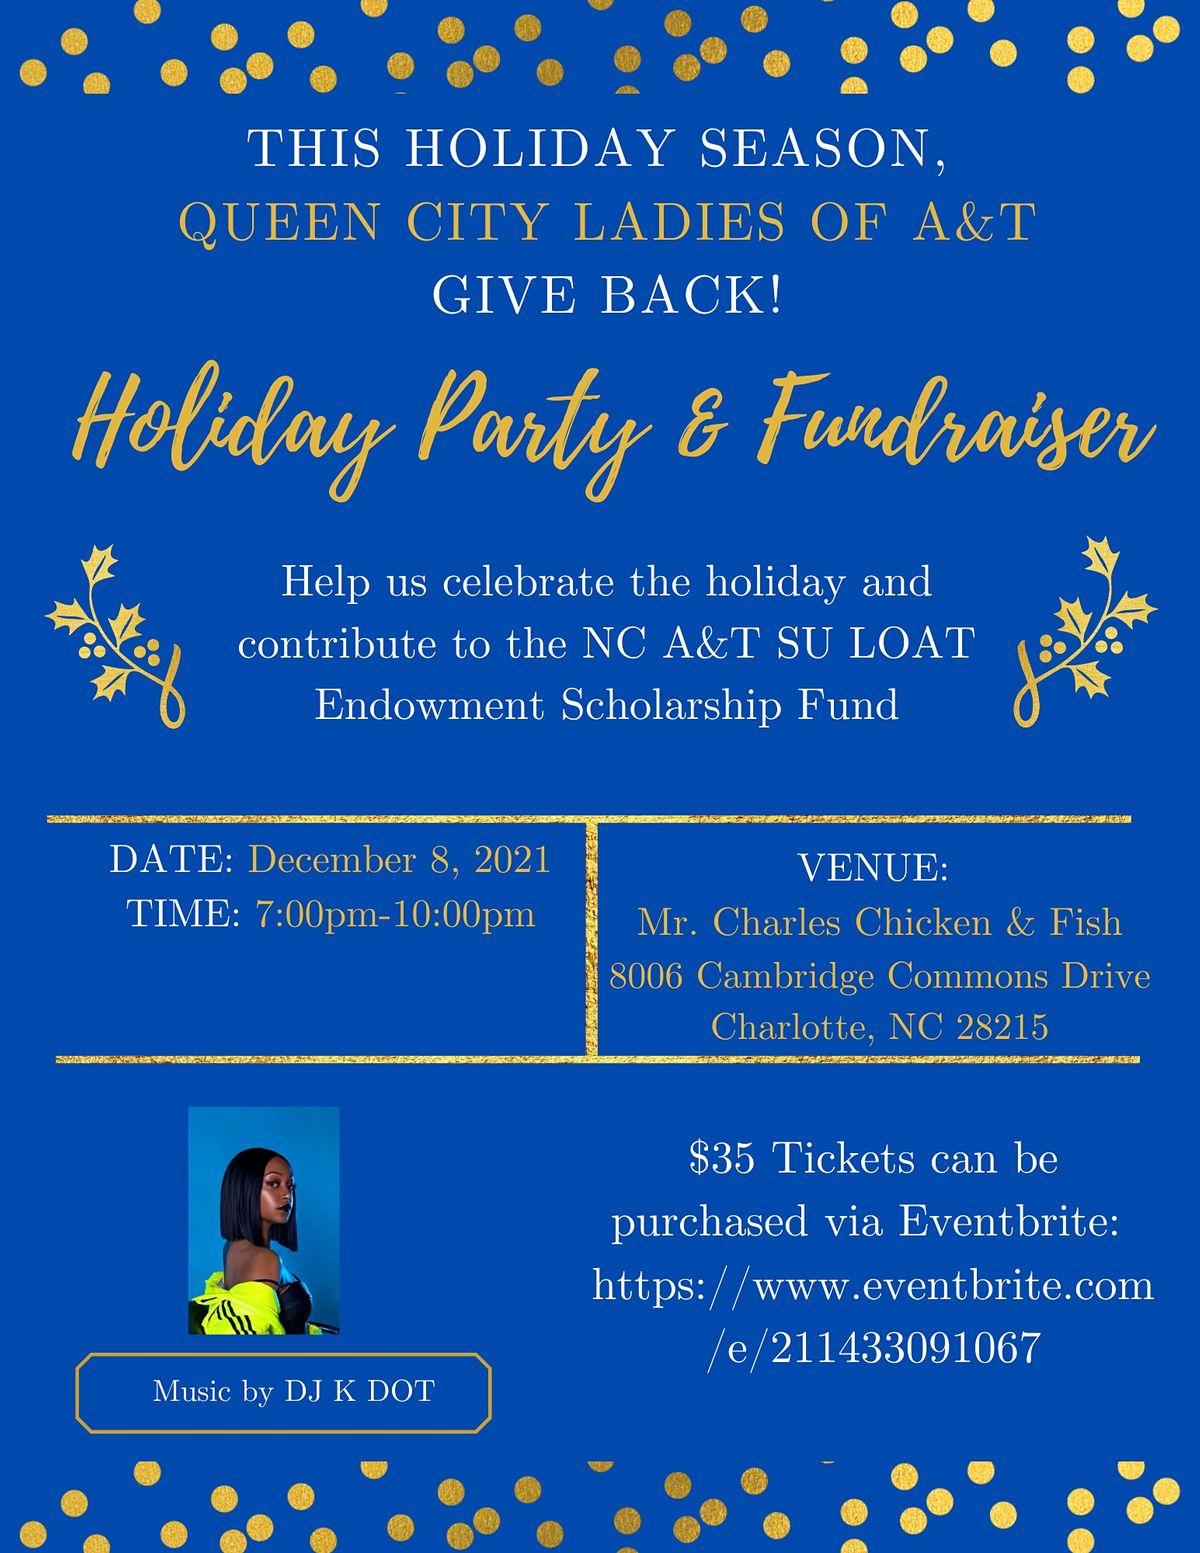 Queen City Ladies of A&T Holiday Party & Fundraiser